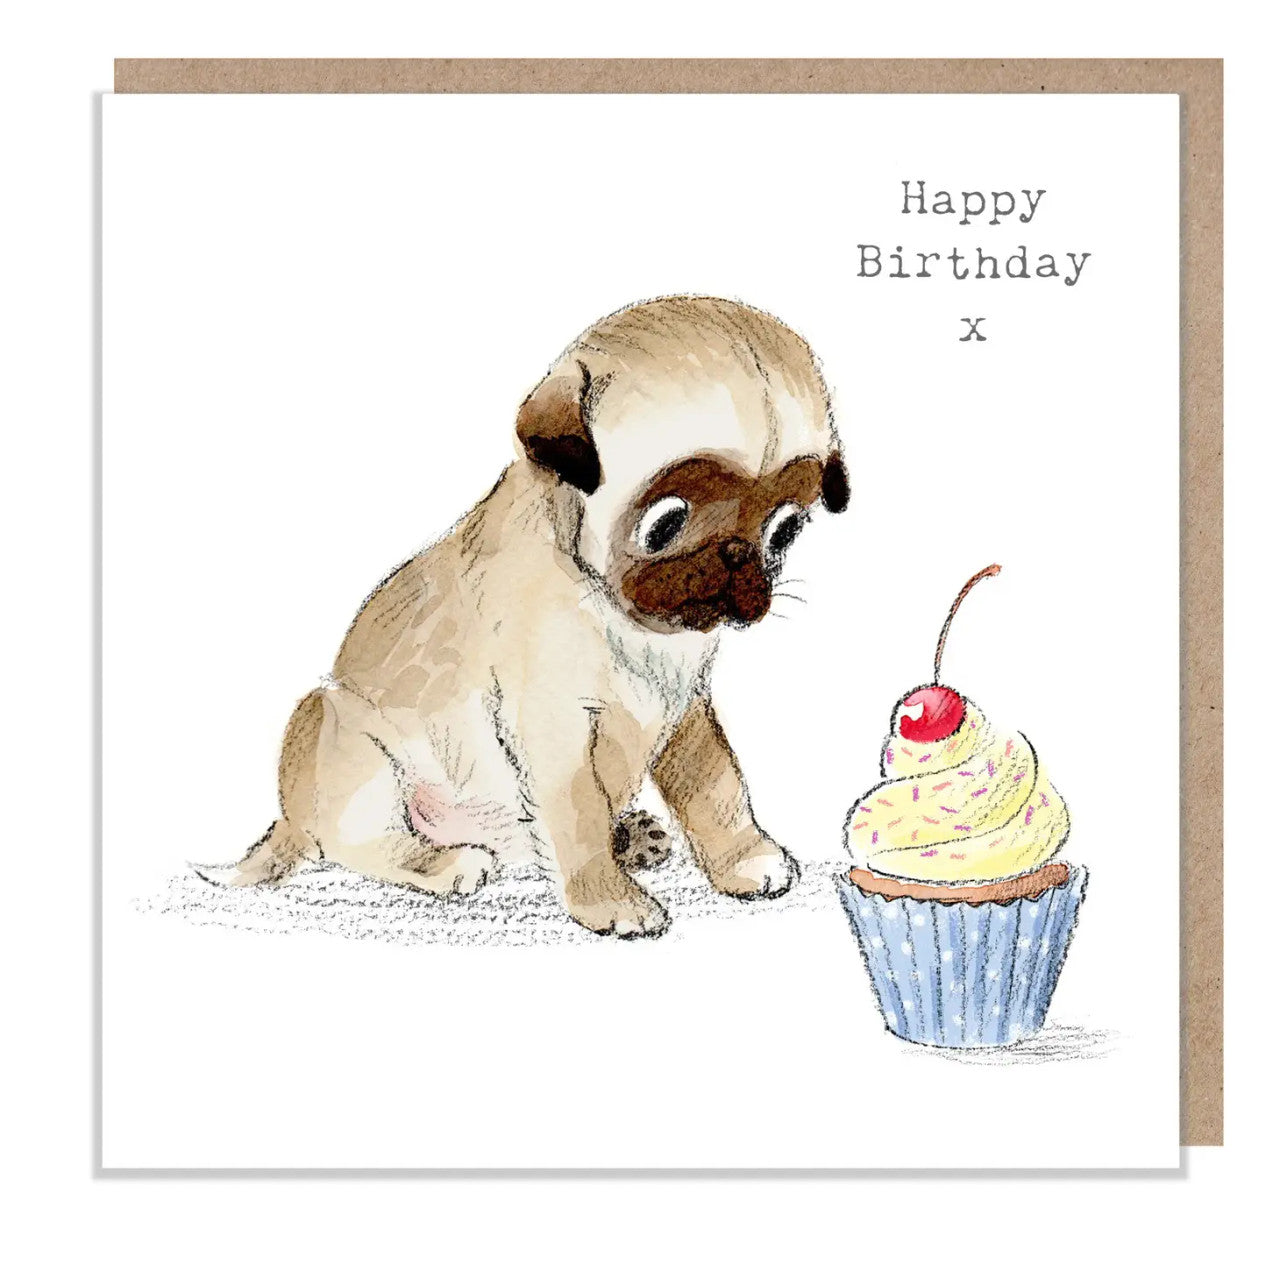 Pug with Cake Happy Birthday Greetings Card by Paper Shed Design